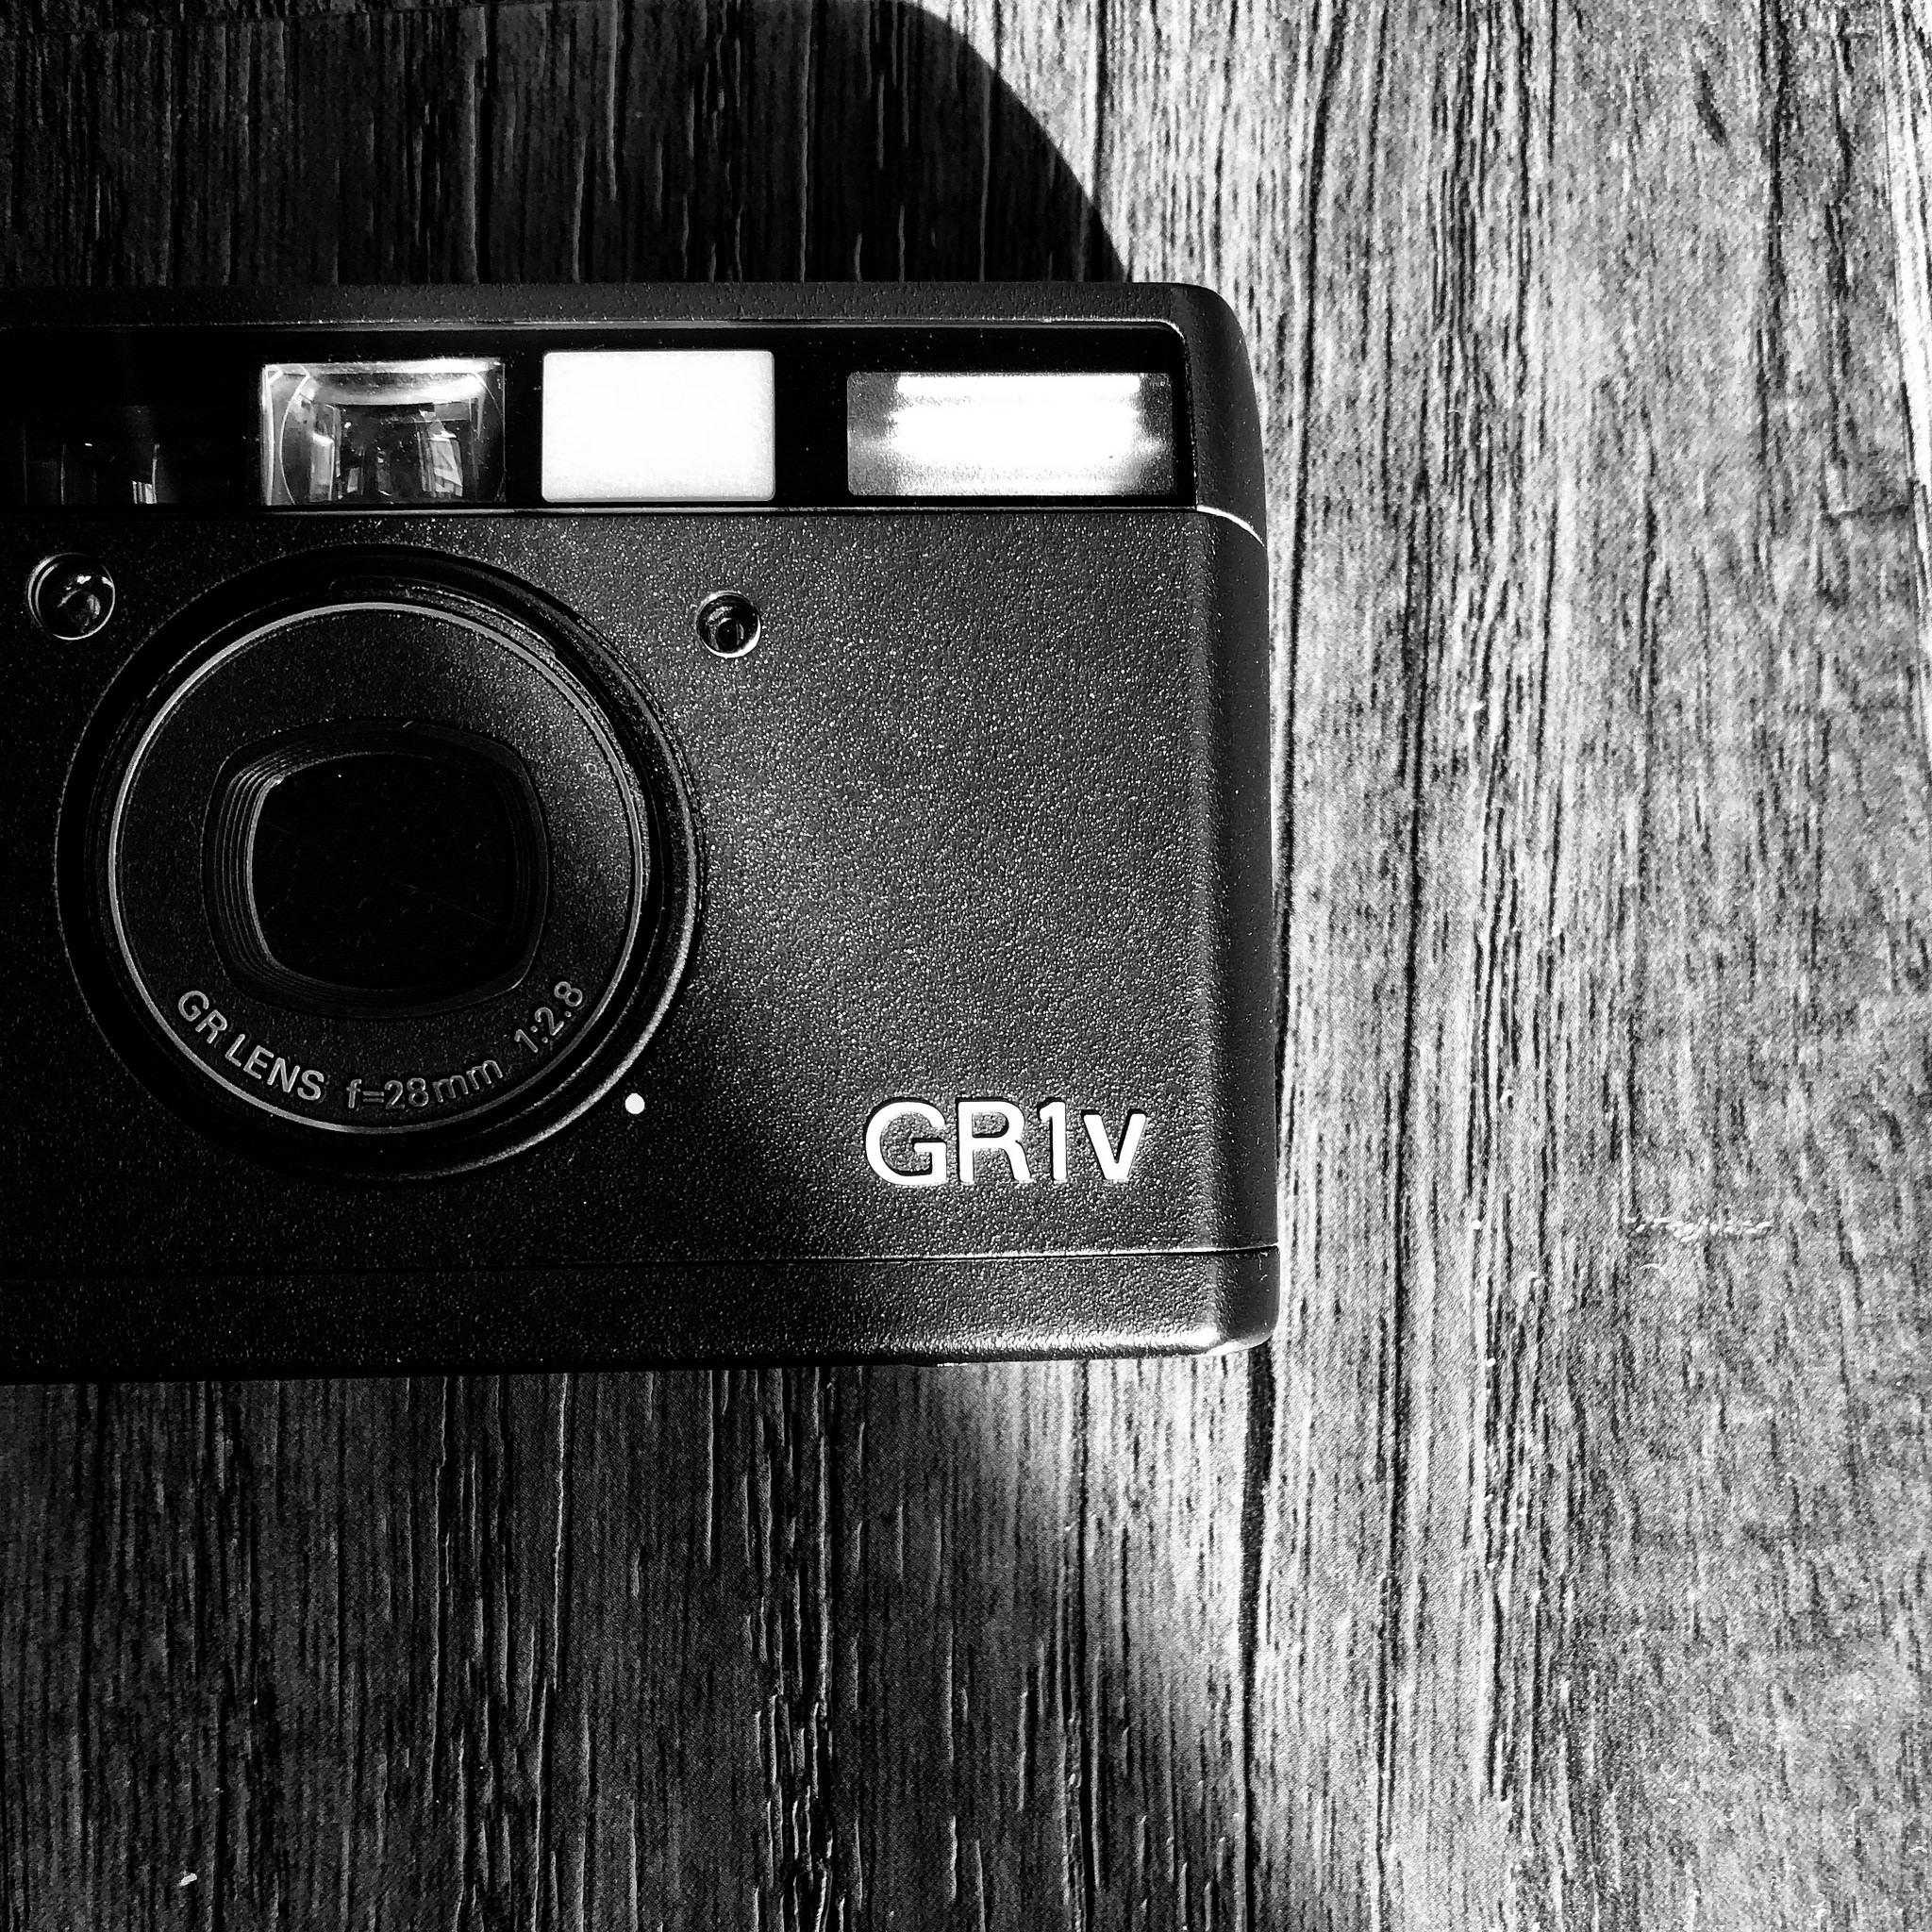 Film camera Review: The Ricoh GR1v in 2018 – KeithWee 